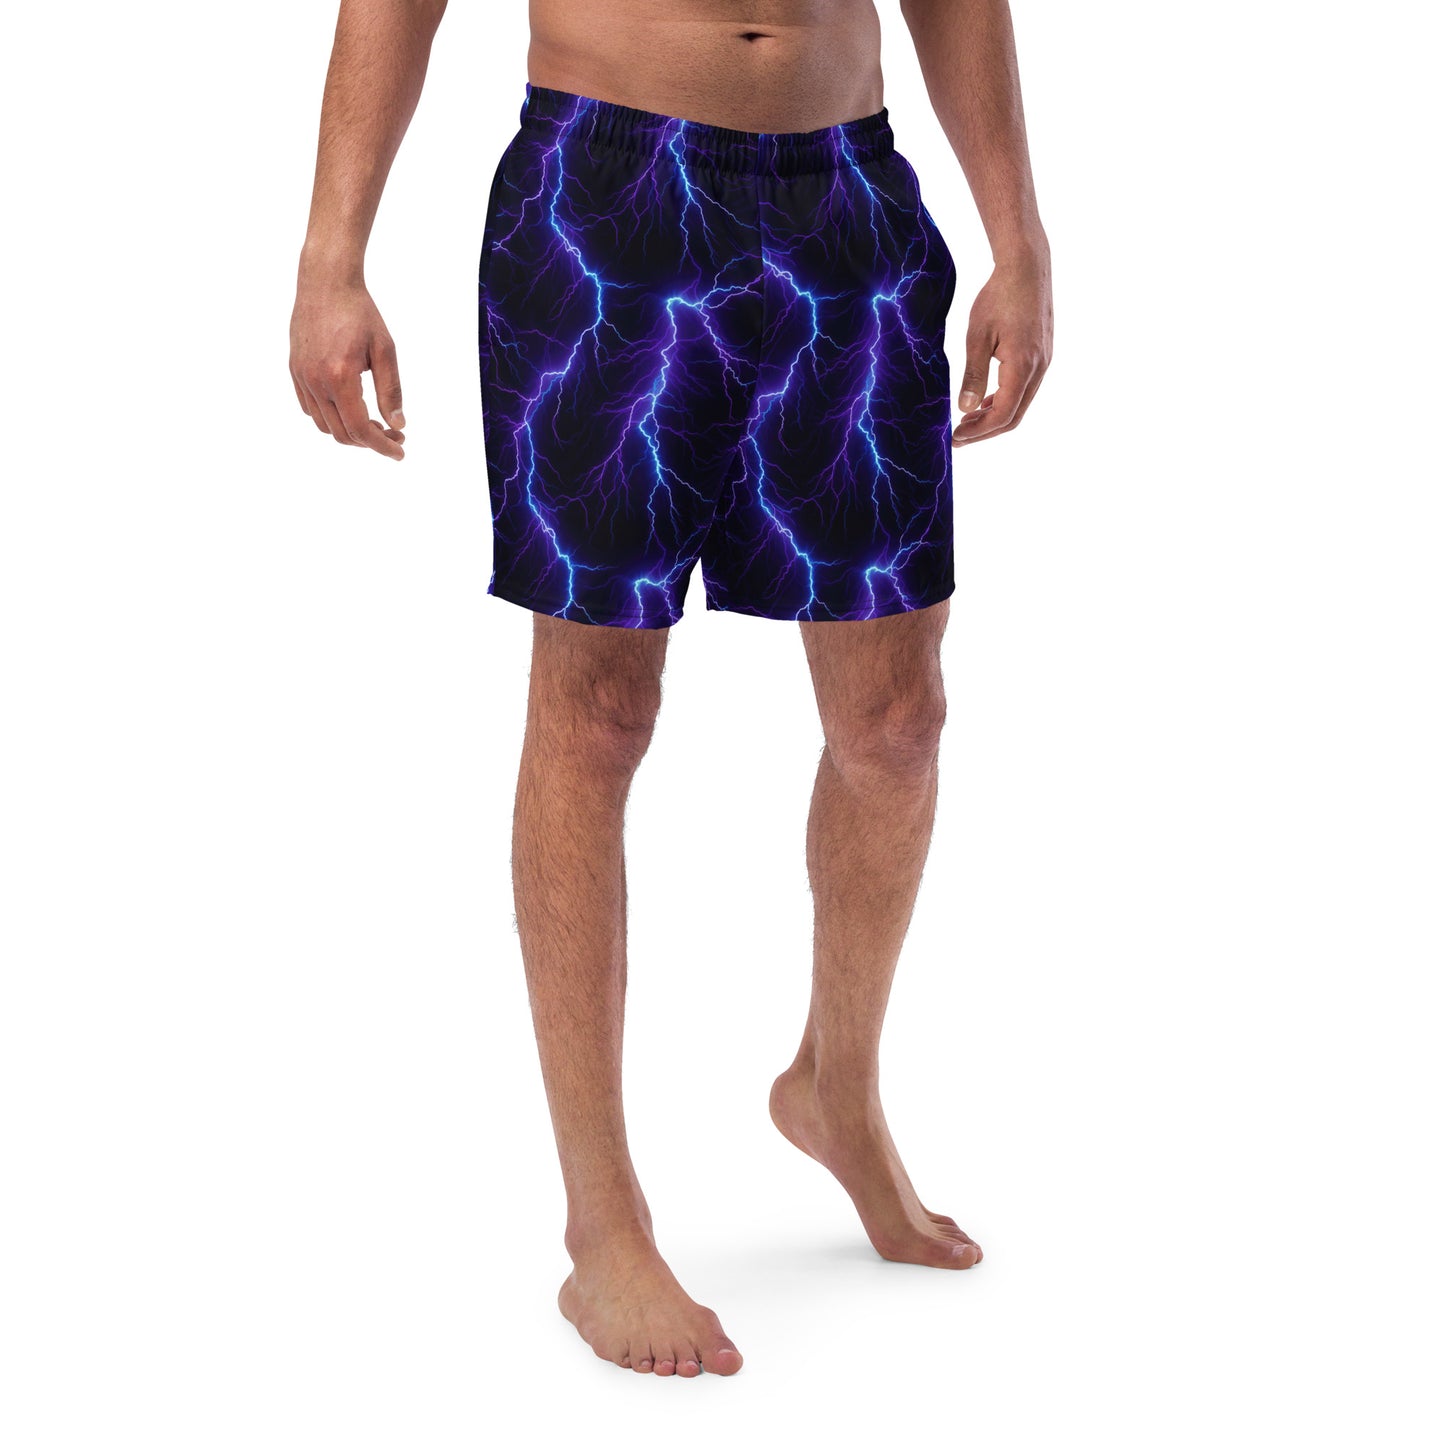 Electric Men's rave shorts, mens rave outfit, plus size rave outfit